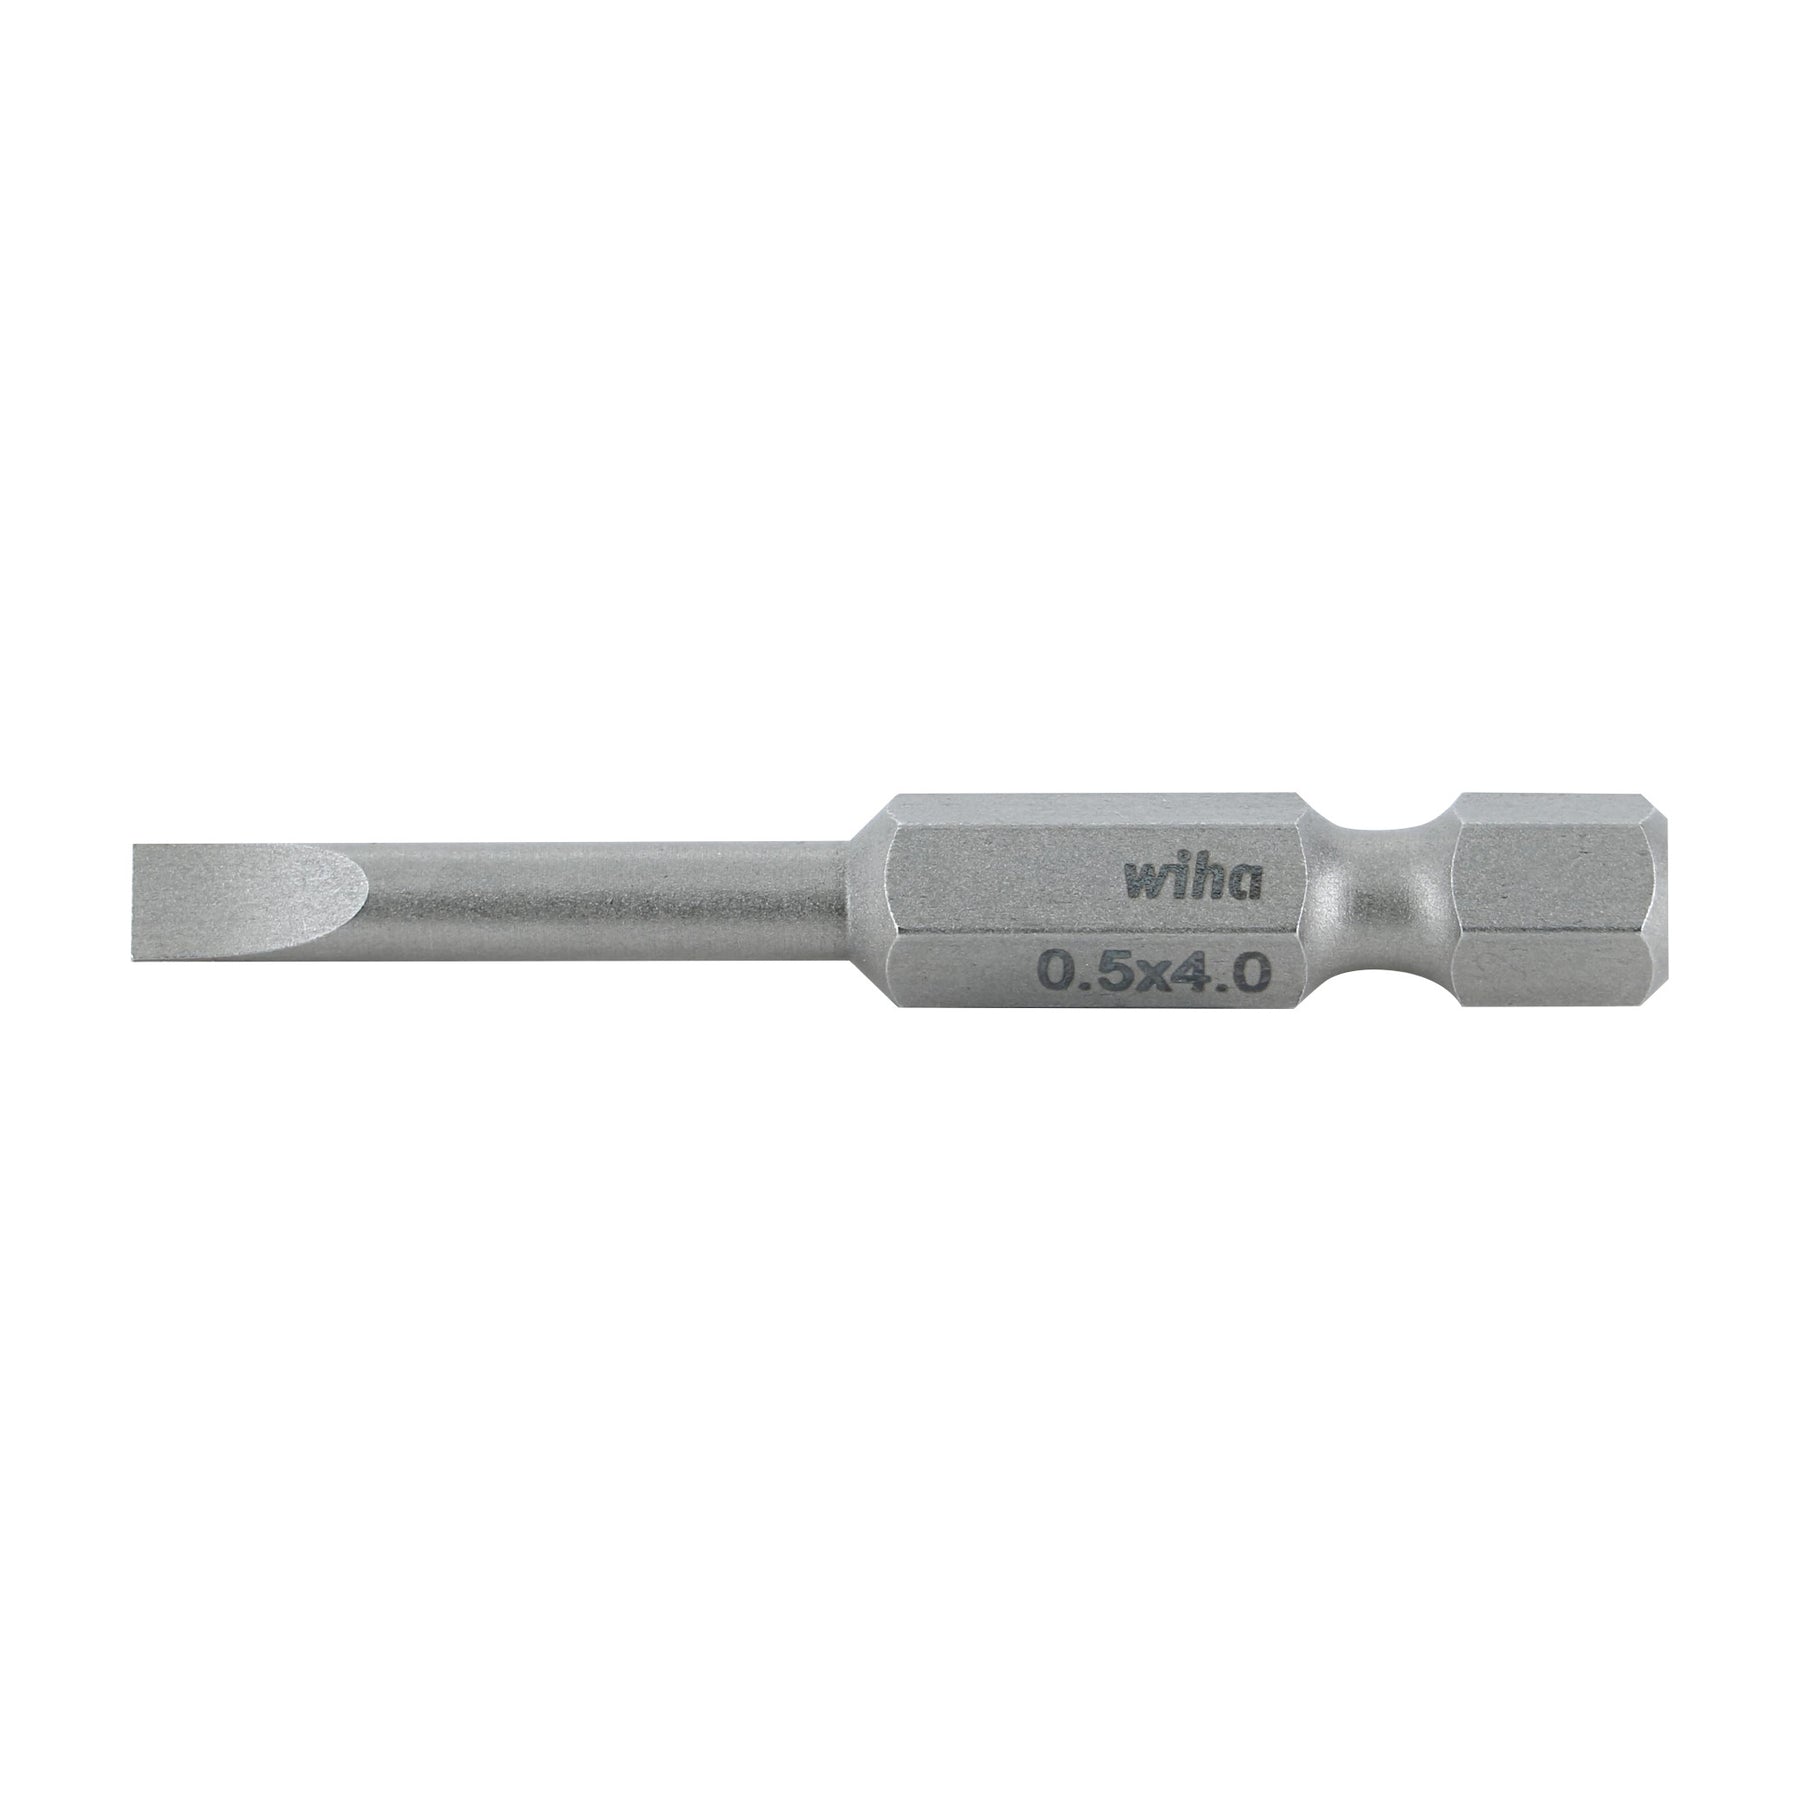 Slotted Bit 4.0 x .5 - 50mm -  10 Pack